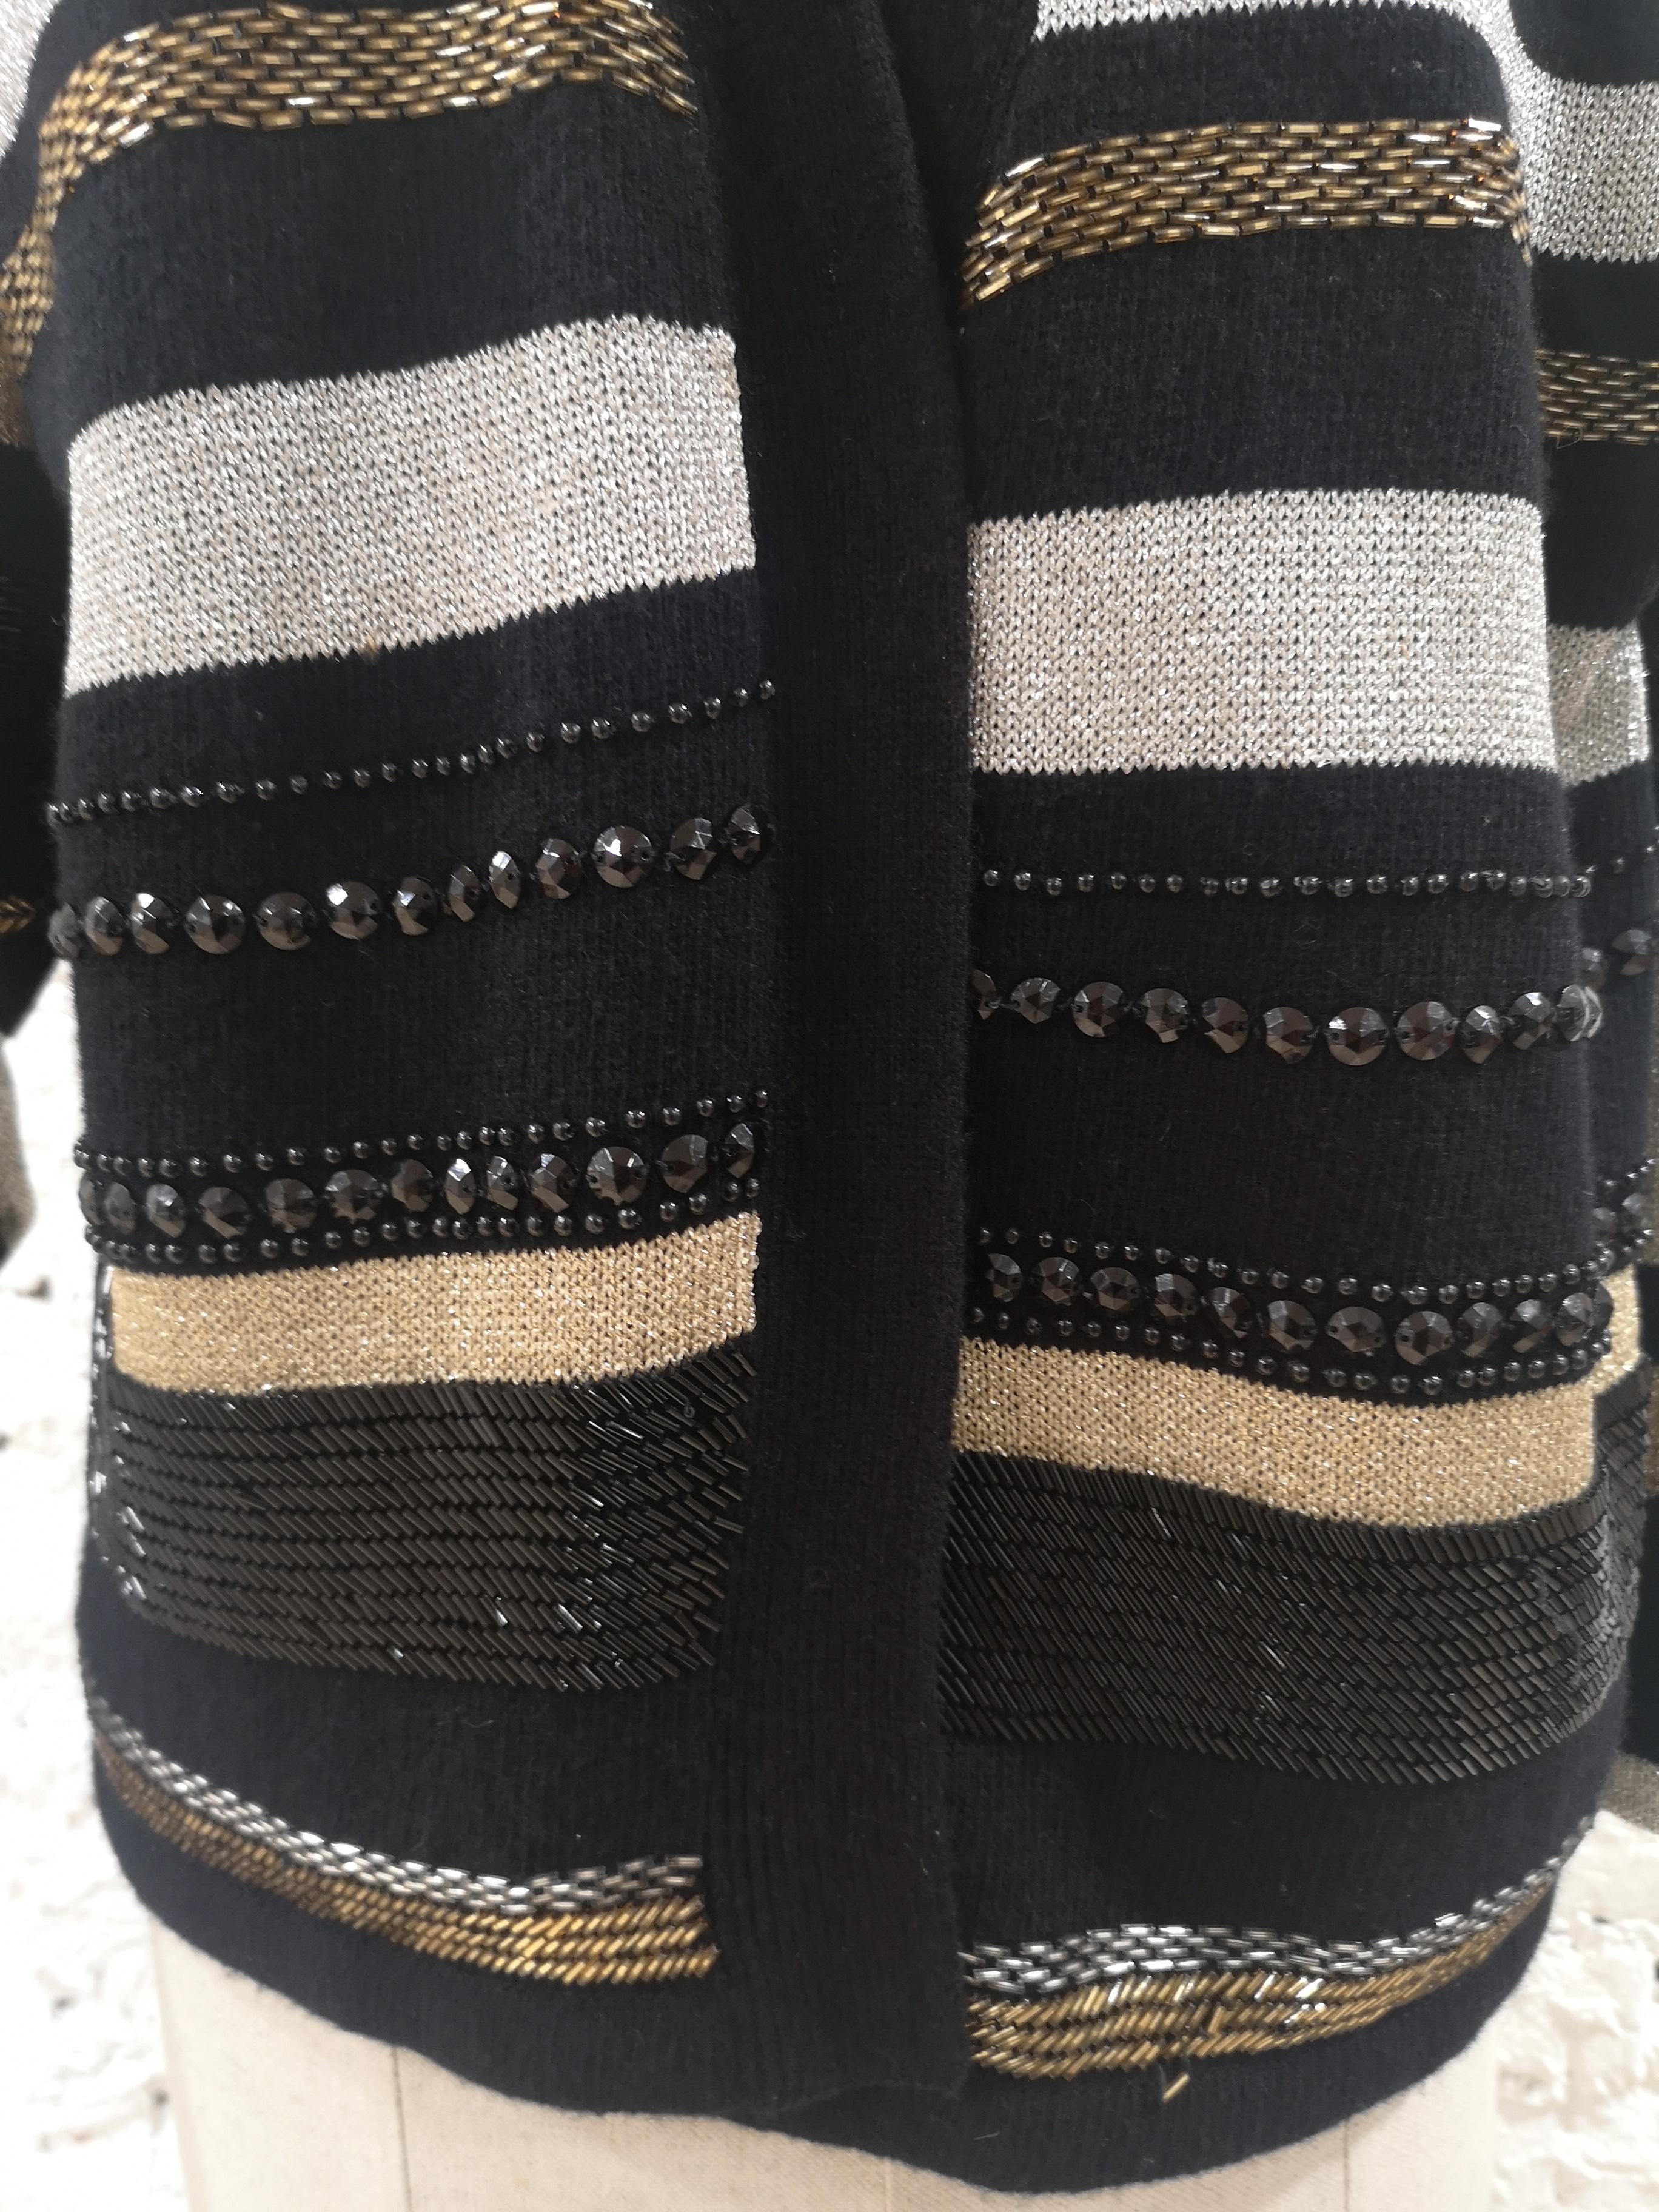 Oronero twin-set shirt and cardigan black gold silver wool
embellished with beads
totally made in italy in size S